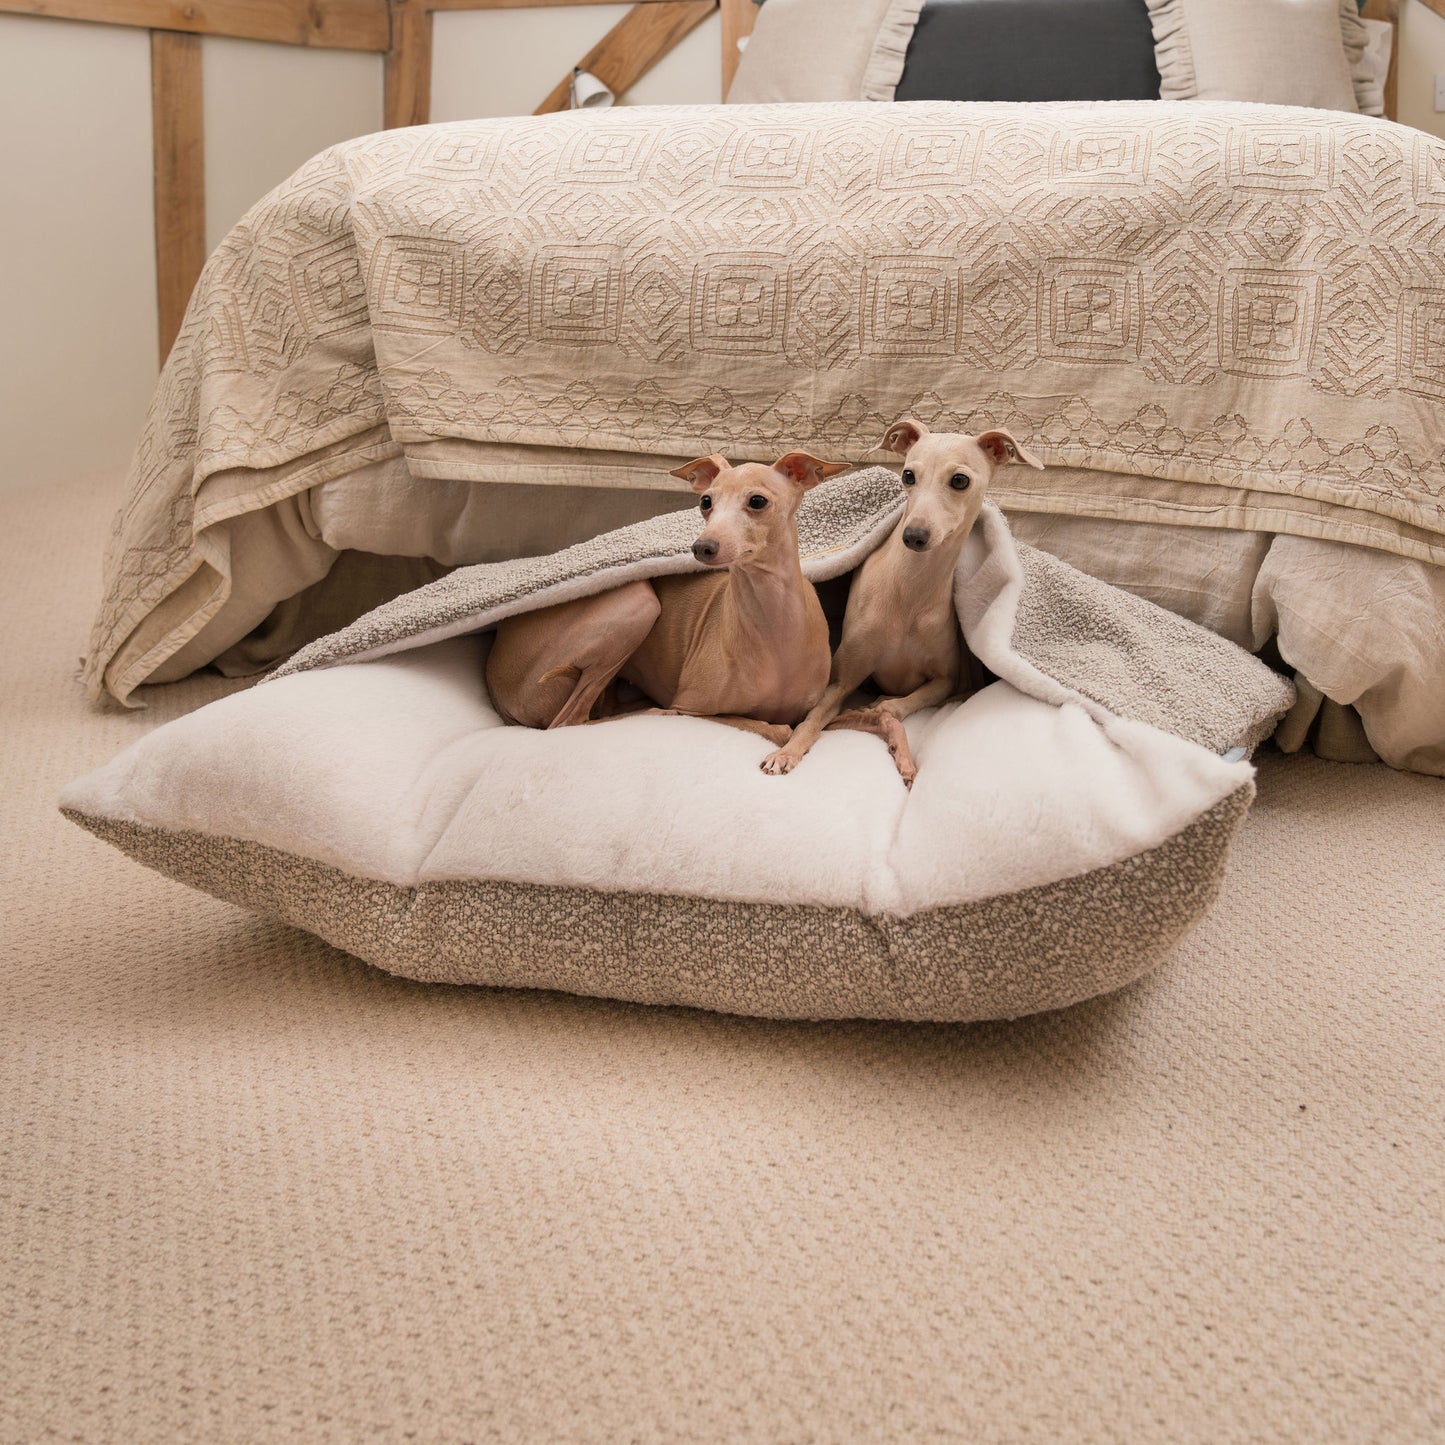 Luxury Mink Boucle Sleepy Burrows, The Perfect bed For a Pet to Burrow. Available To Personalize In Stunning Mink Bouclé Here at Lords & Labradors US